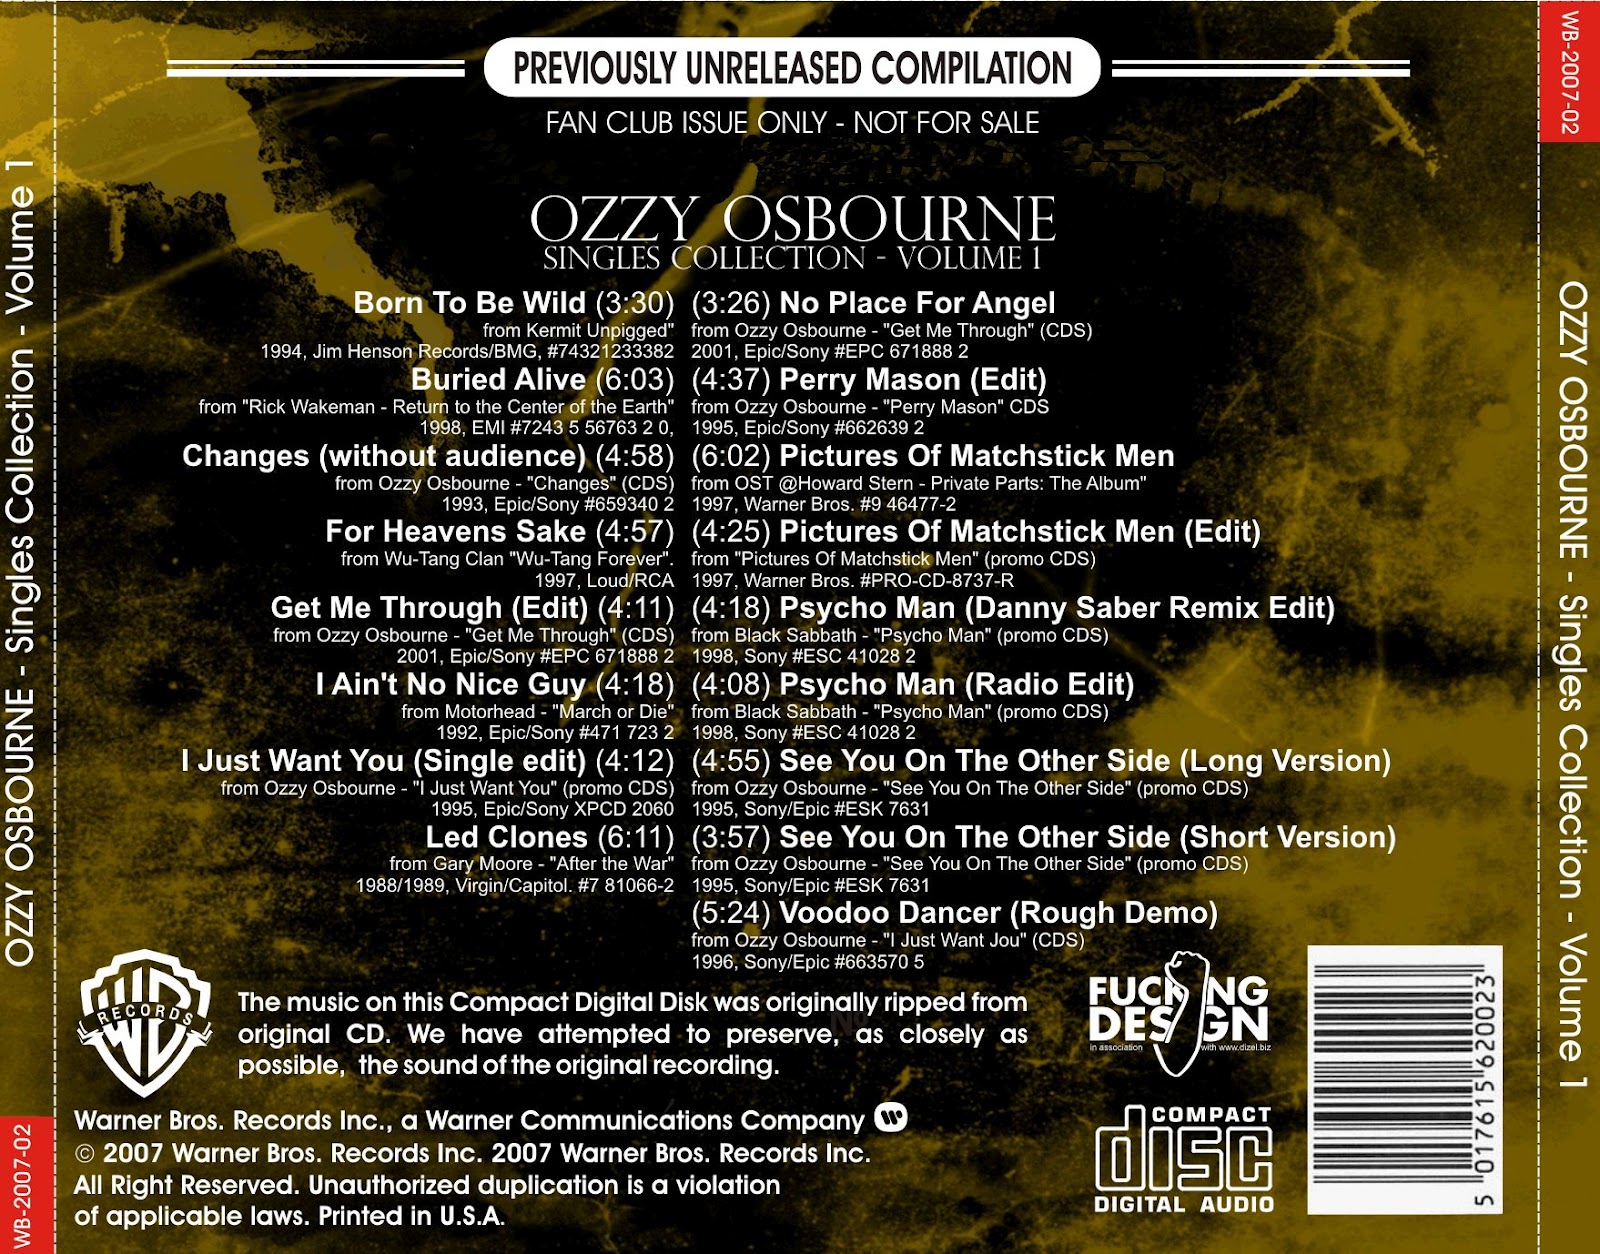 BlooD AnD HonoR MetaL: Ozzy Osbourne - Singles Collection: Volume 1 (2007)